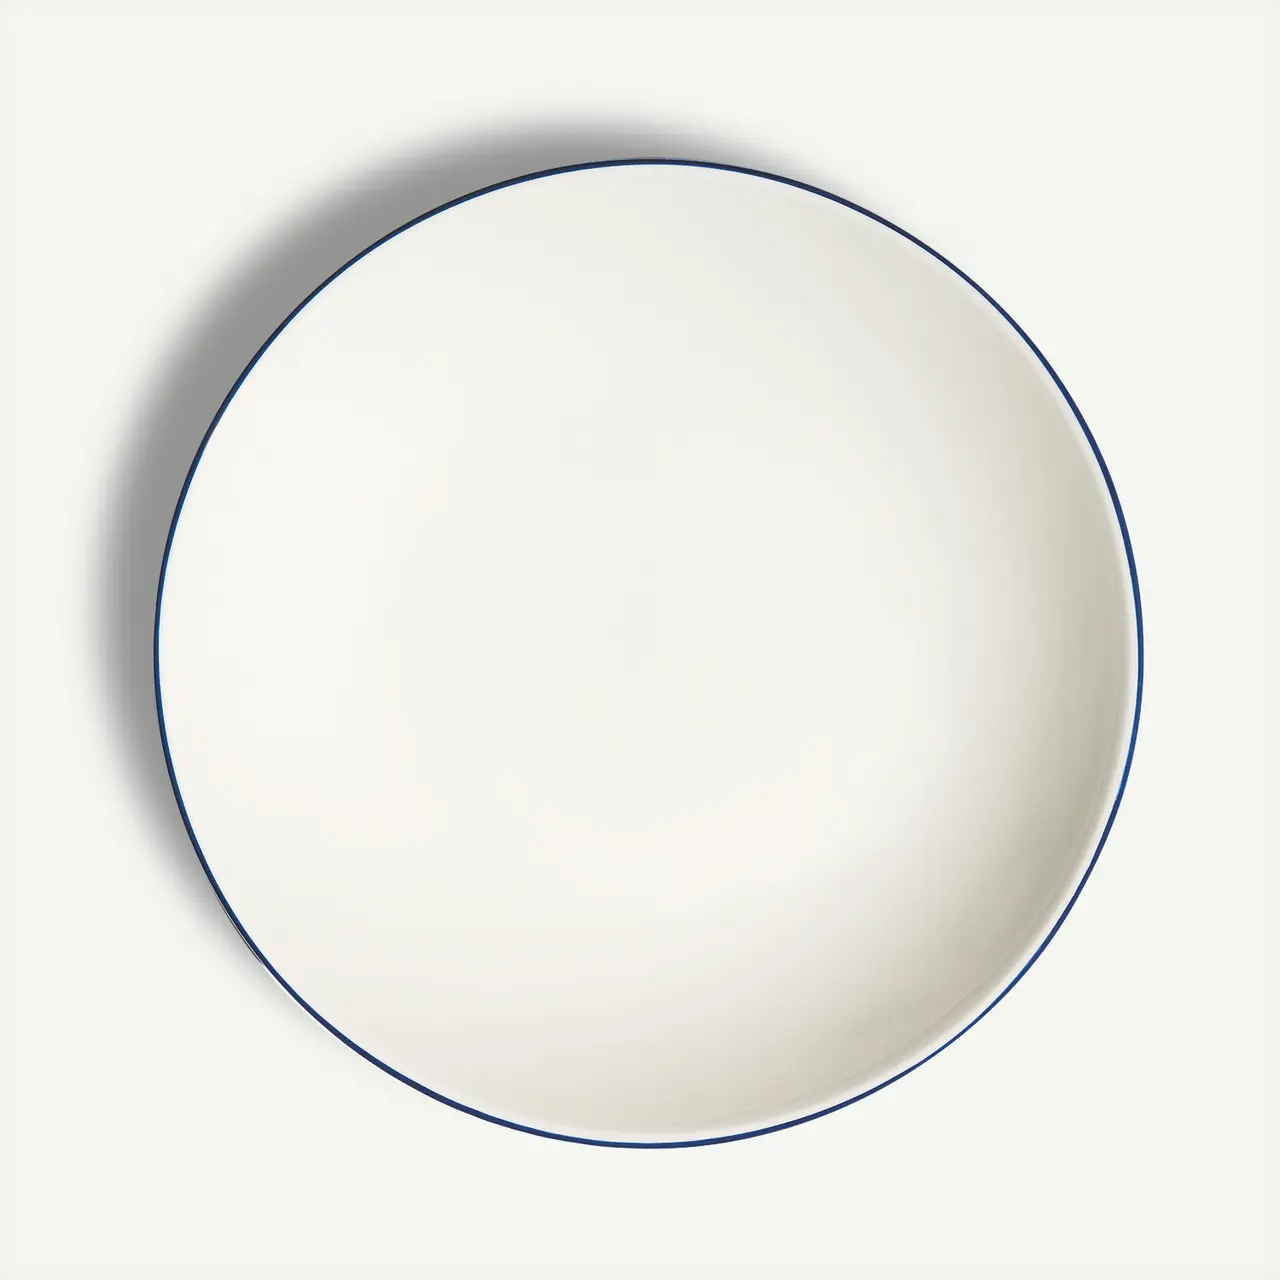 A plain white plate with a simple blue border is displayed against a light background.